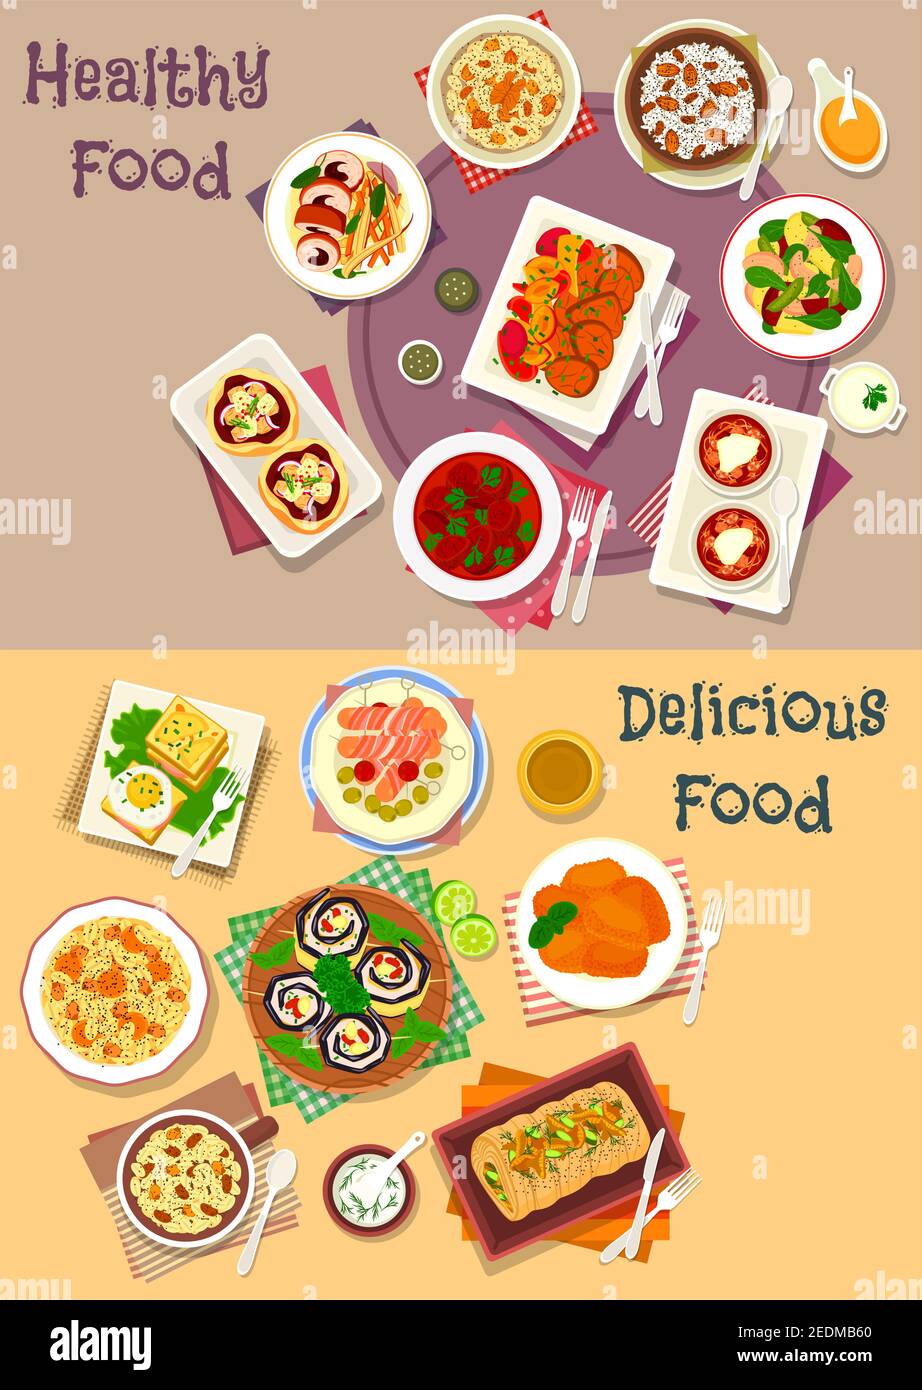 Dinner icon set with ham and egg sandwich, cheese pizza, sausage in bacon, vegetable fish salad, wheat and rice pudding with dried fruit and nut, bake Stock Vector